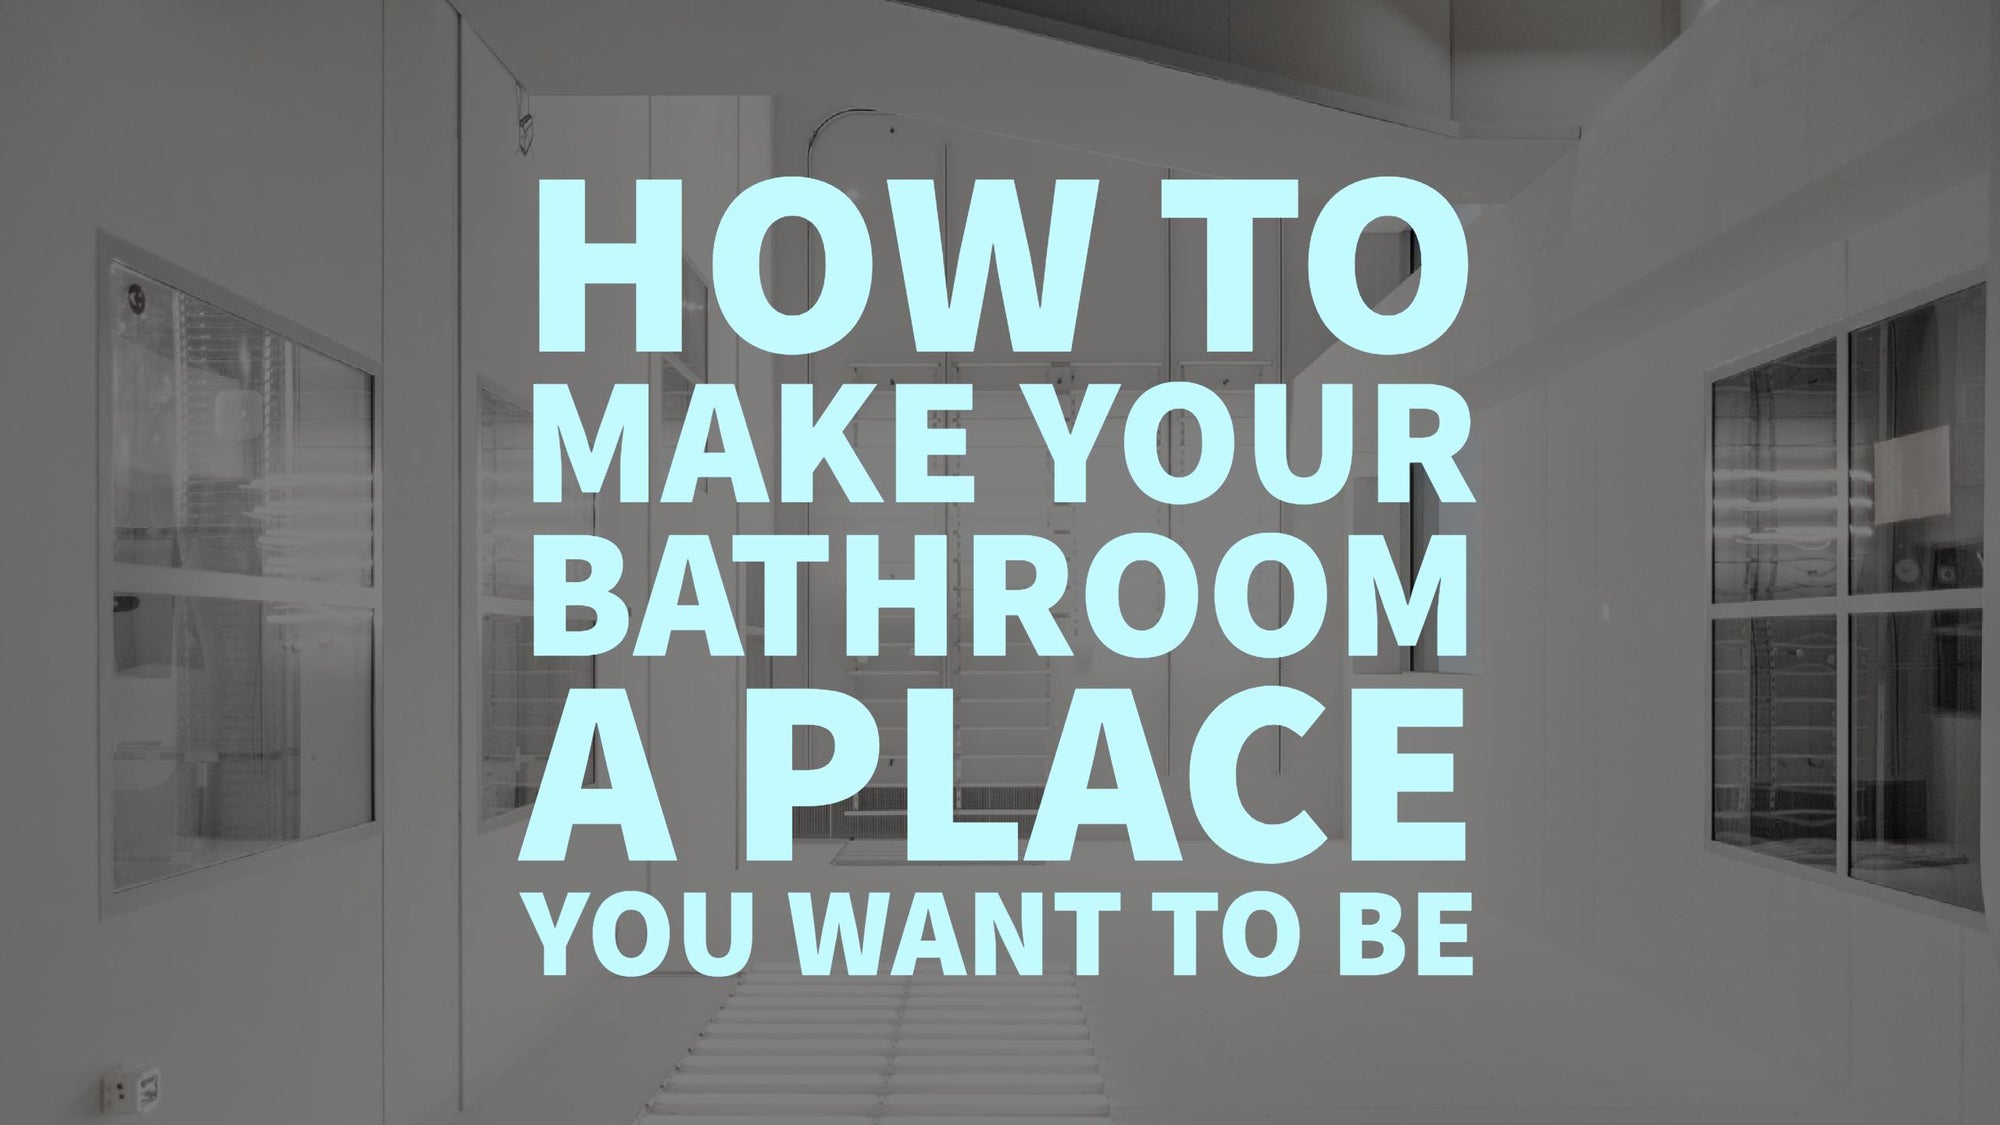 How To Make Your Bathroom a Place You Want to Be